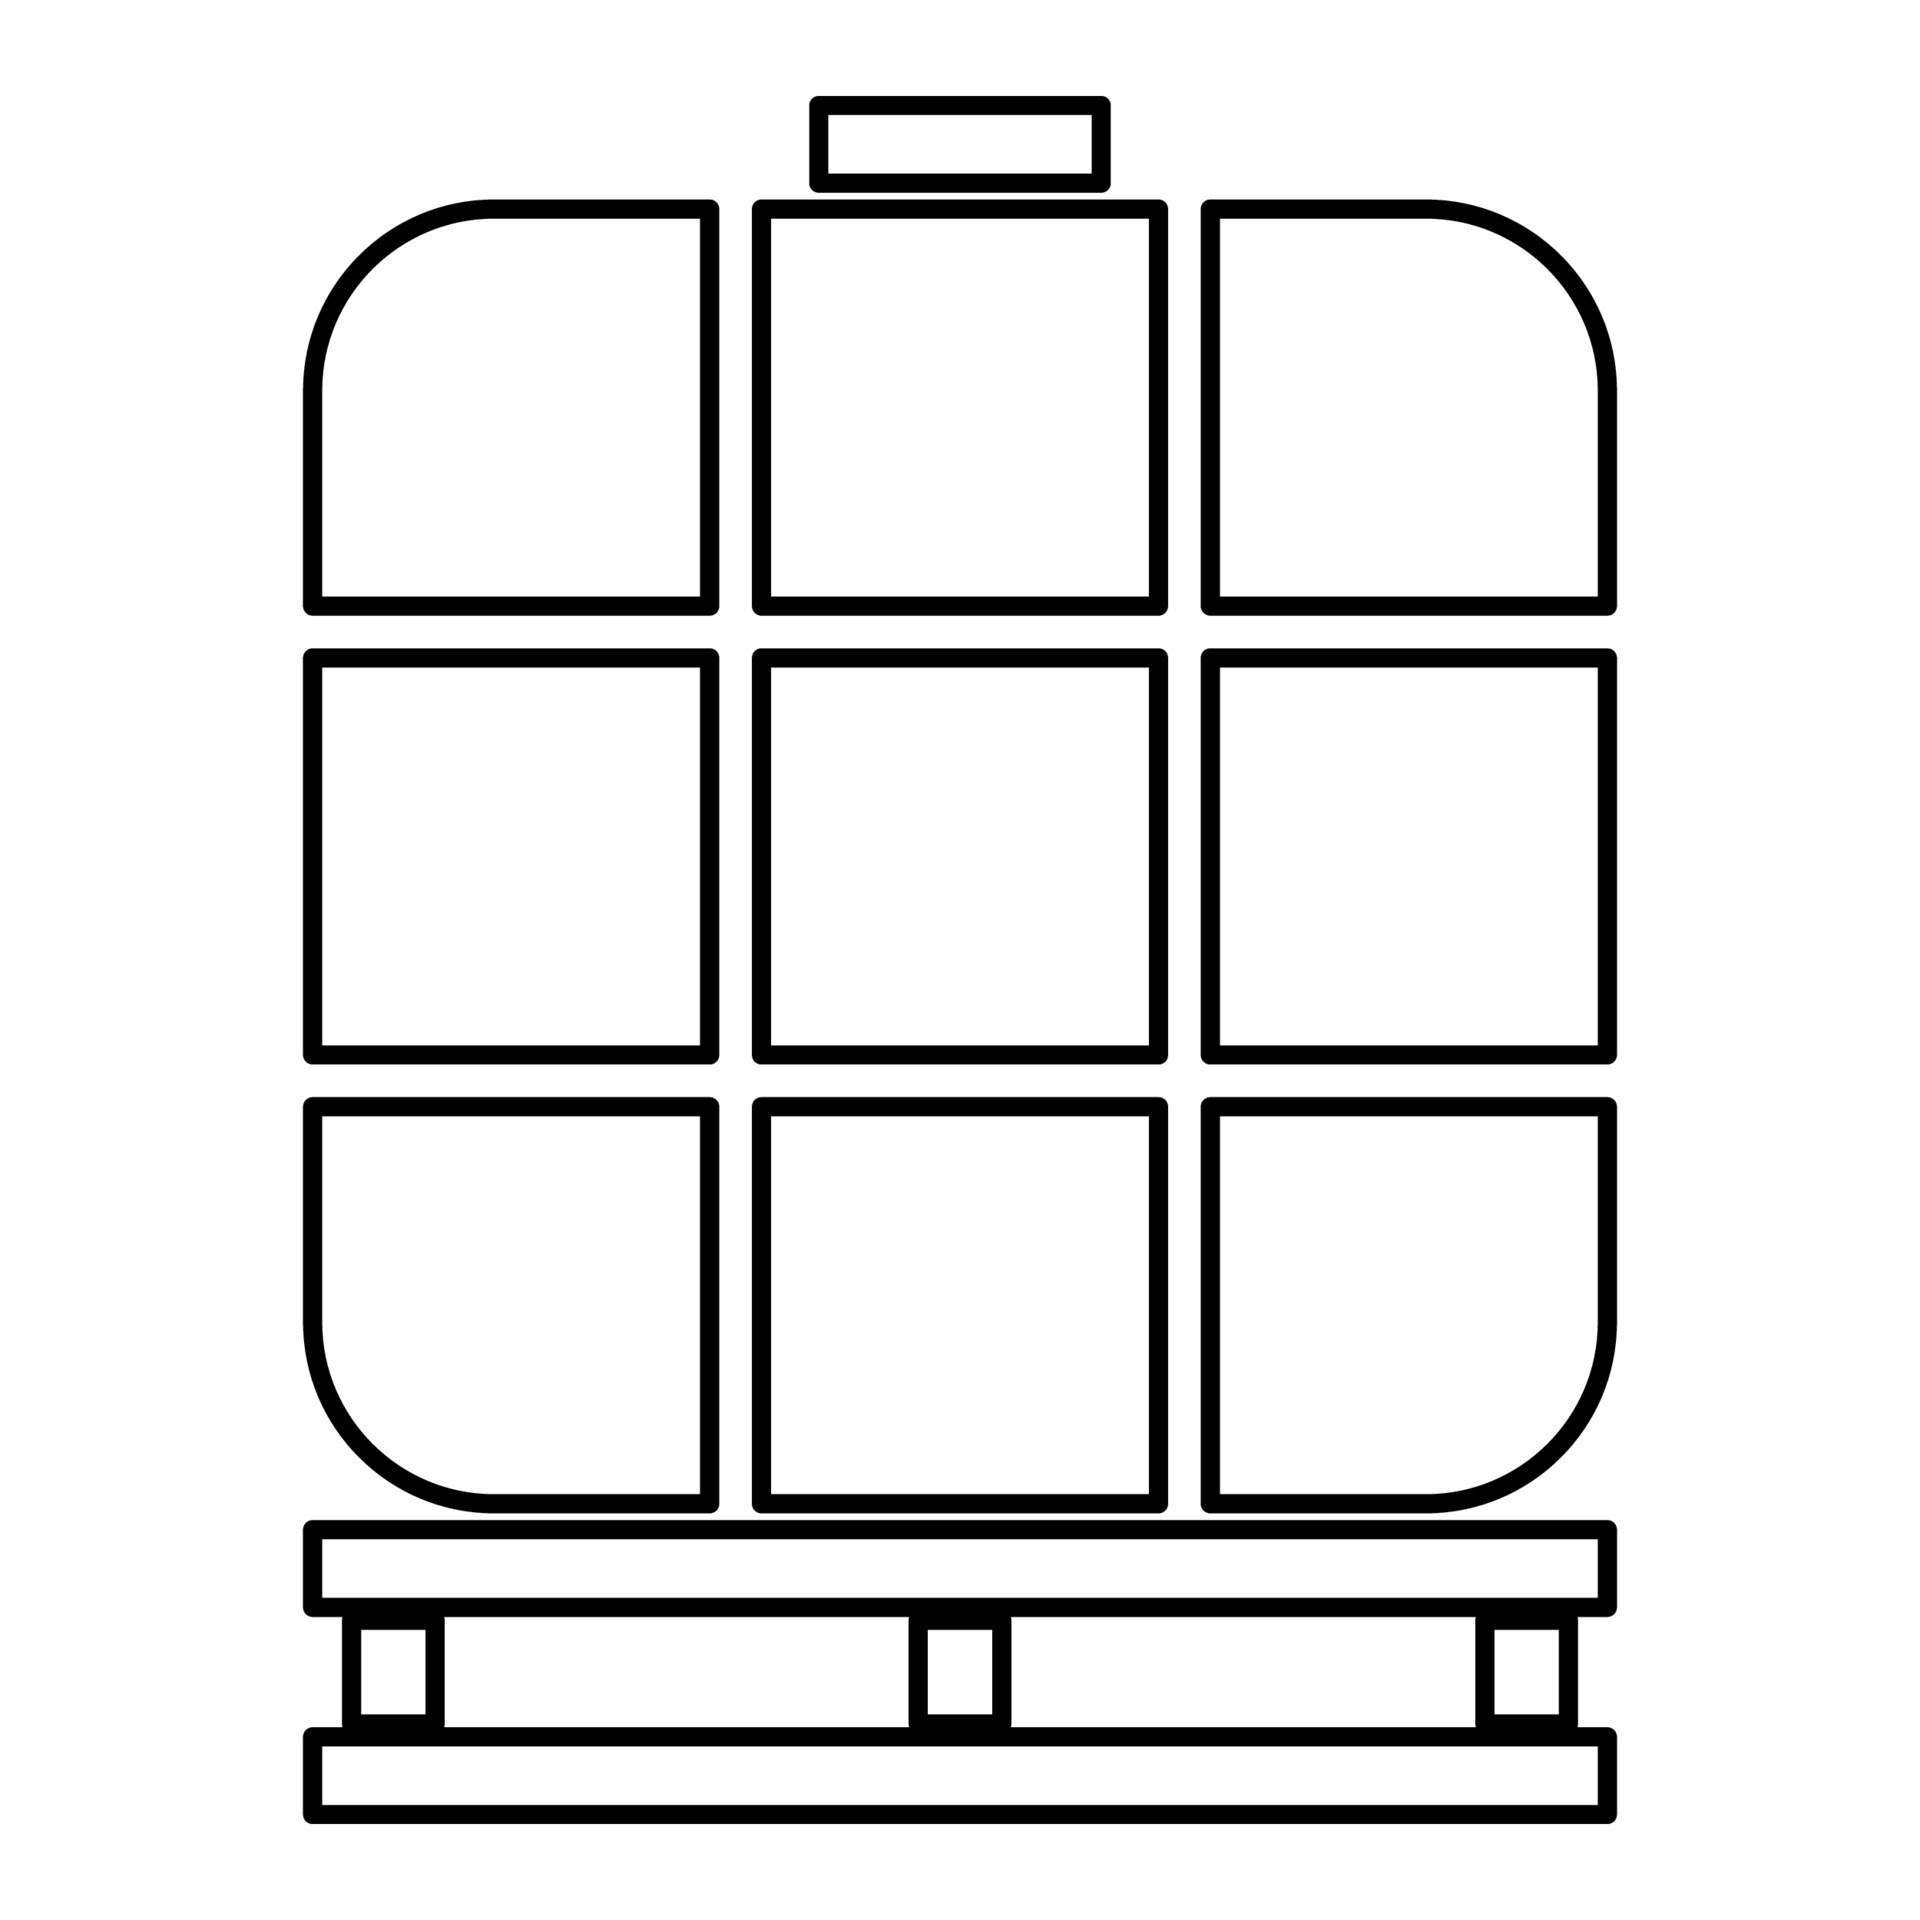 Chemical tanks, liquid containers, municipal storage tank, storage tank,  water storage tank icon - Download on Iconfinder